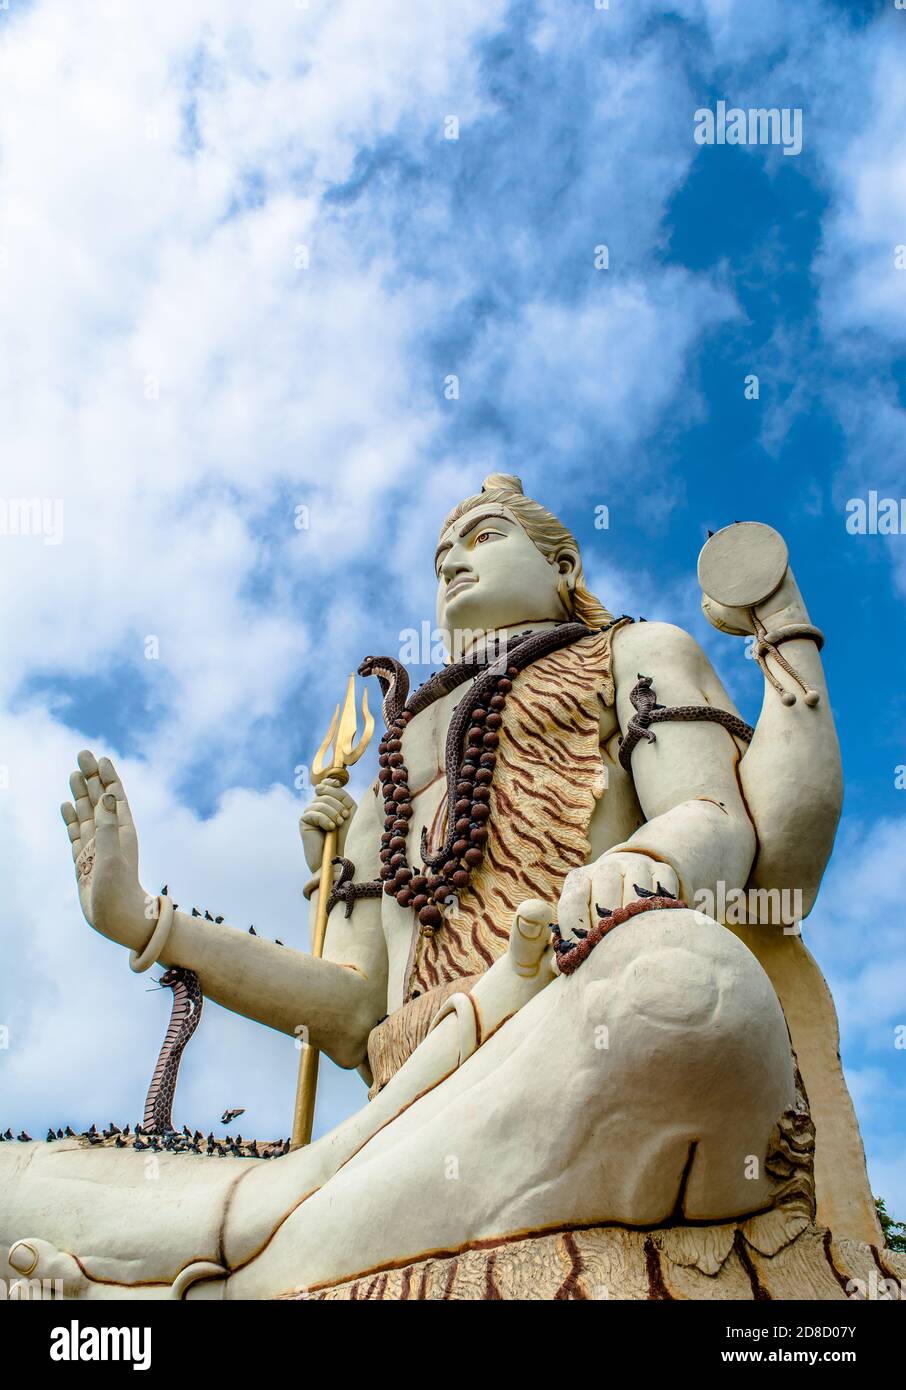 Big shiv statue. Nageshvara is one of the temples mentioned in the Shiva Purana and is one of the twelve Jyotirlingas. Stock Photo